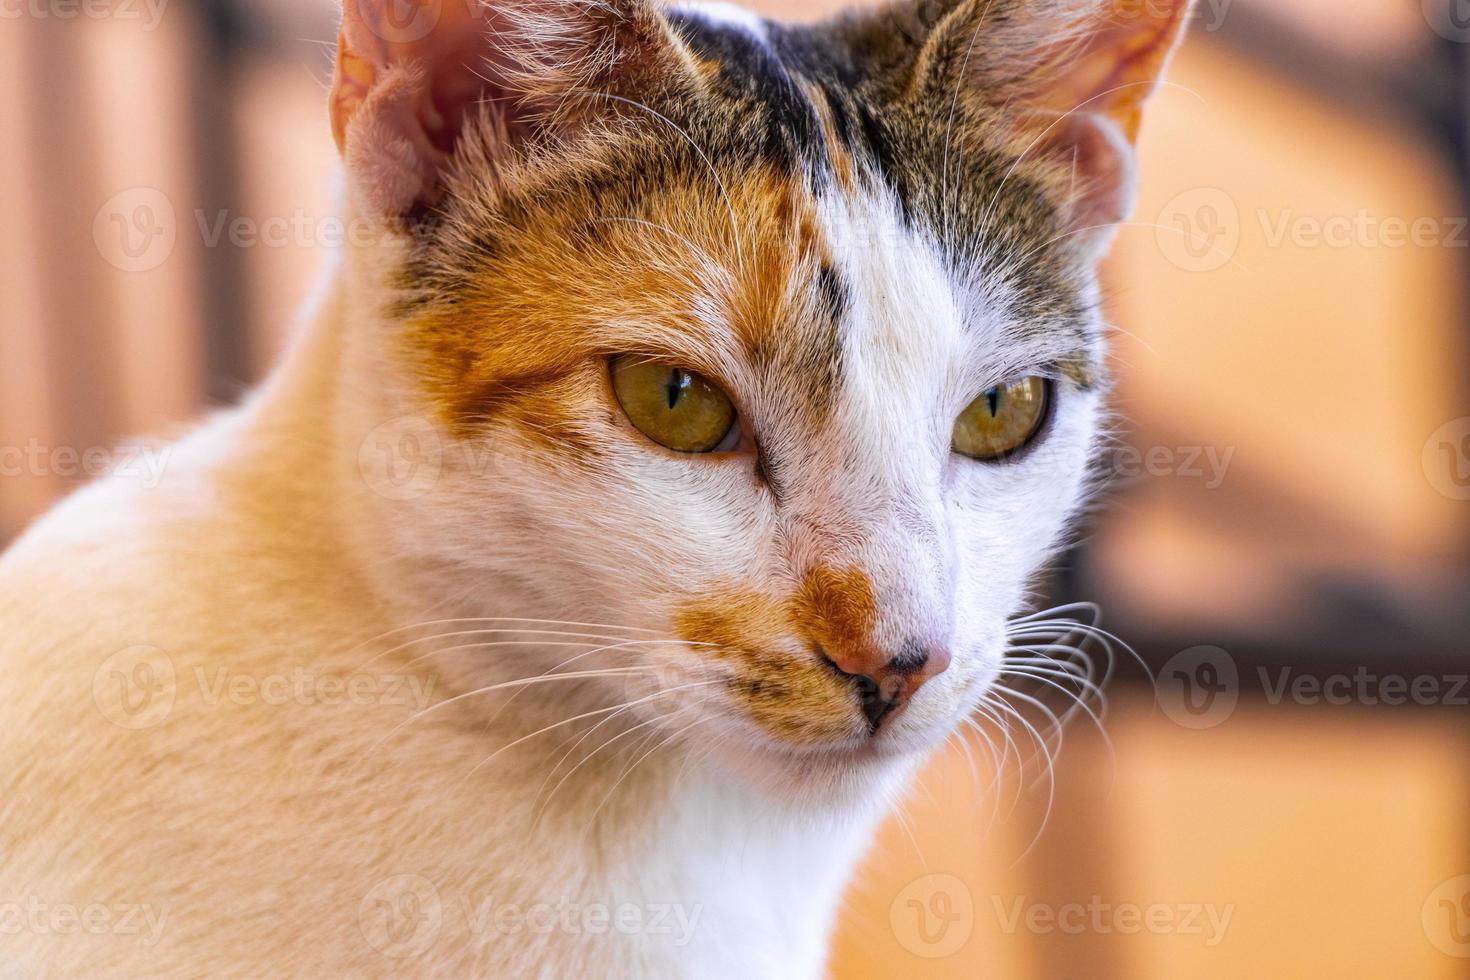 Mexican white cat portrait looking lovely and cute in Mexico. photo